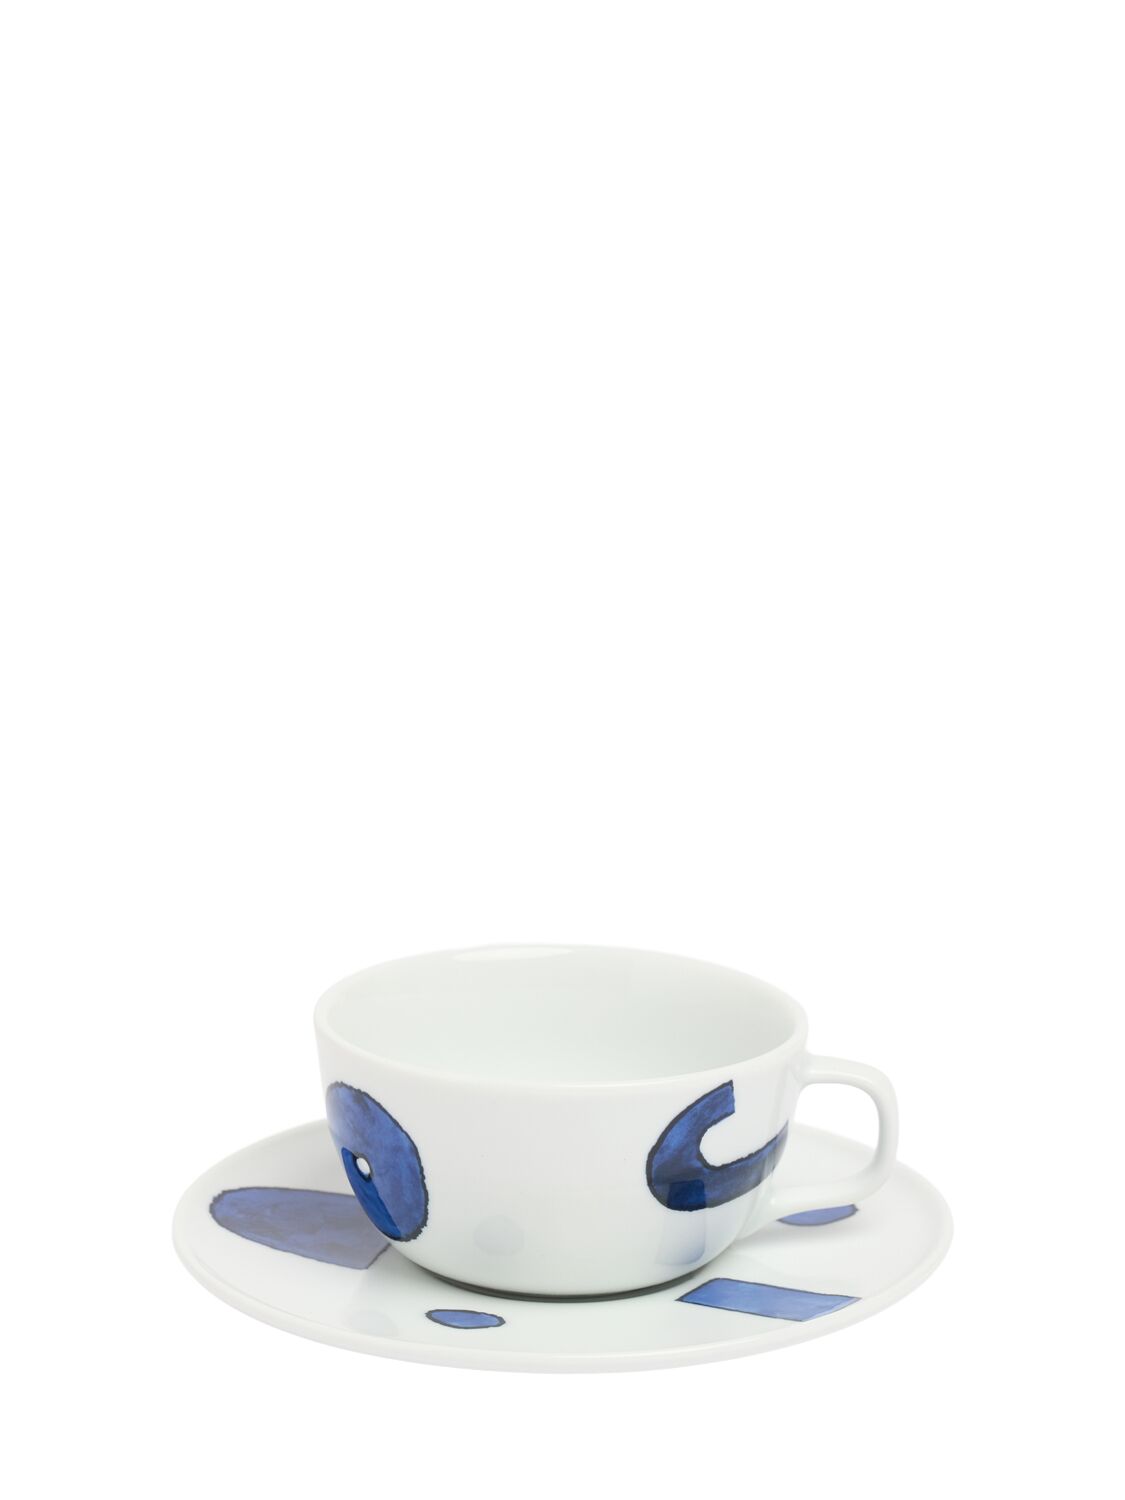 Alessi Set Of 4 Itsumo Teacups & Saucers In White